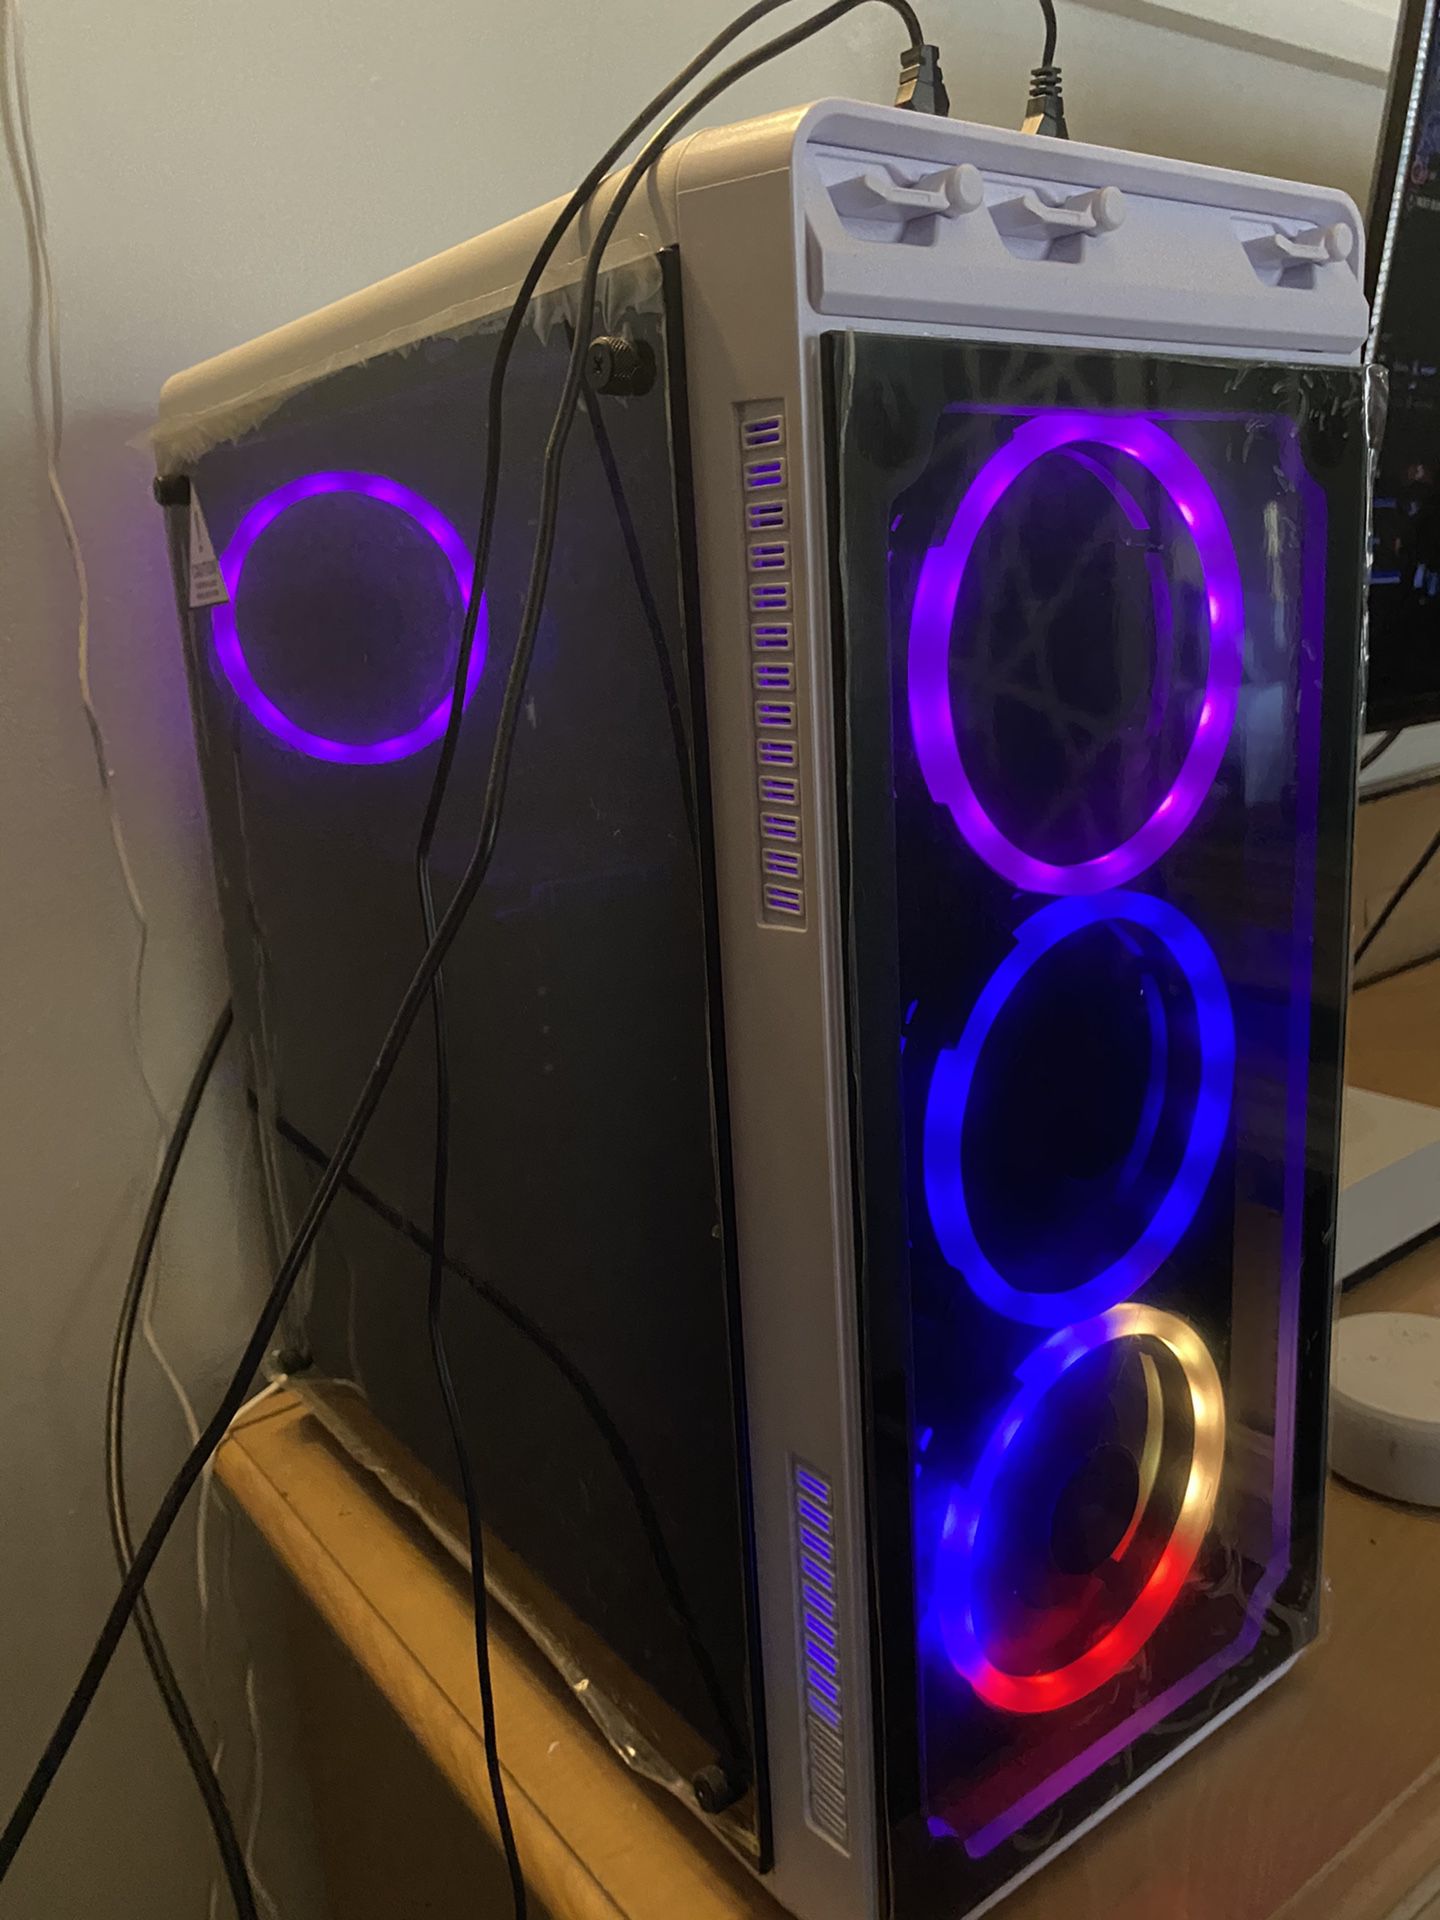 This is a Intel Gaming computer